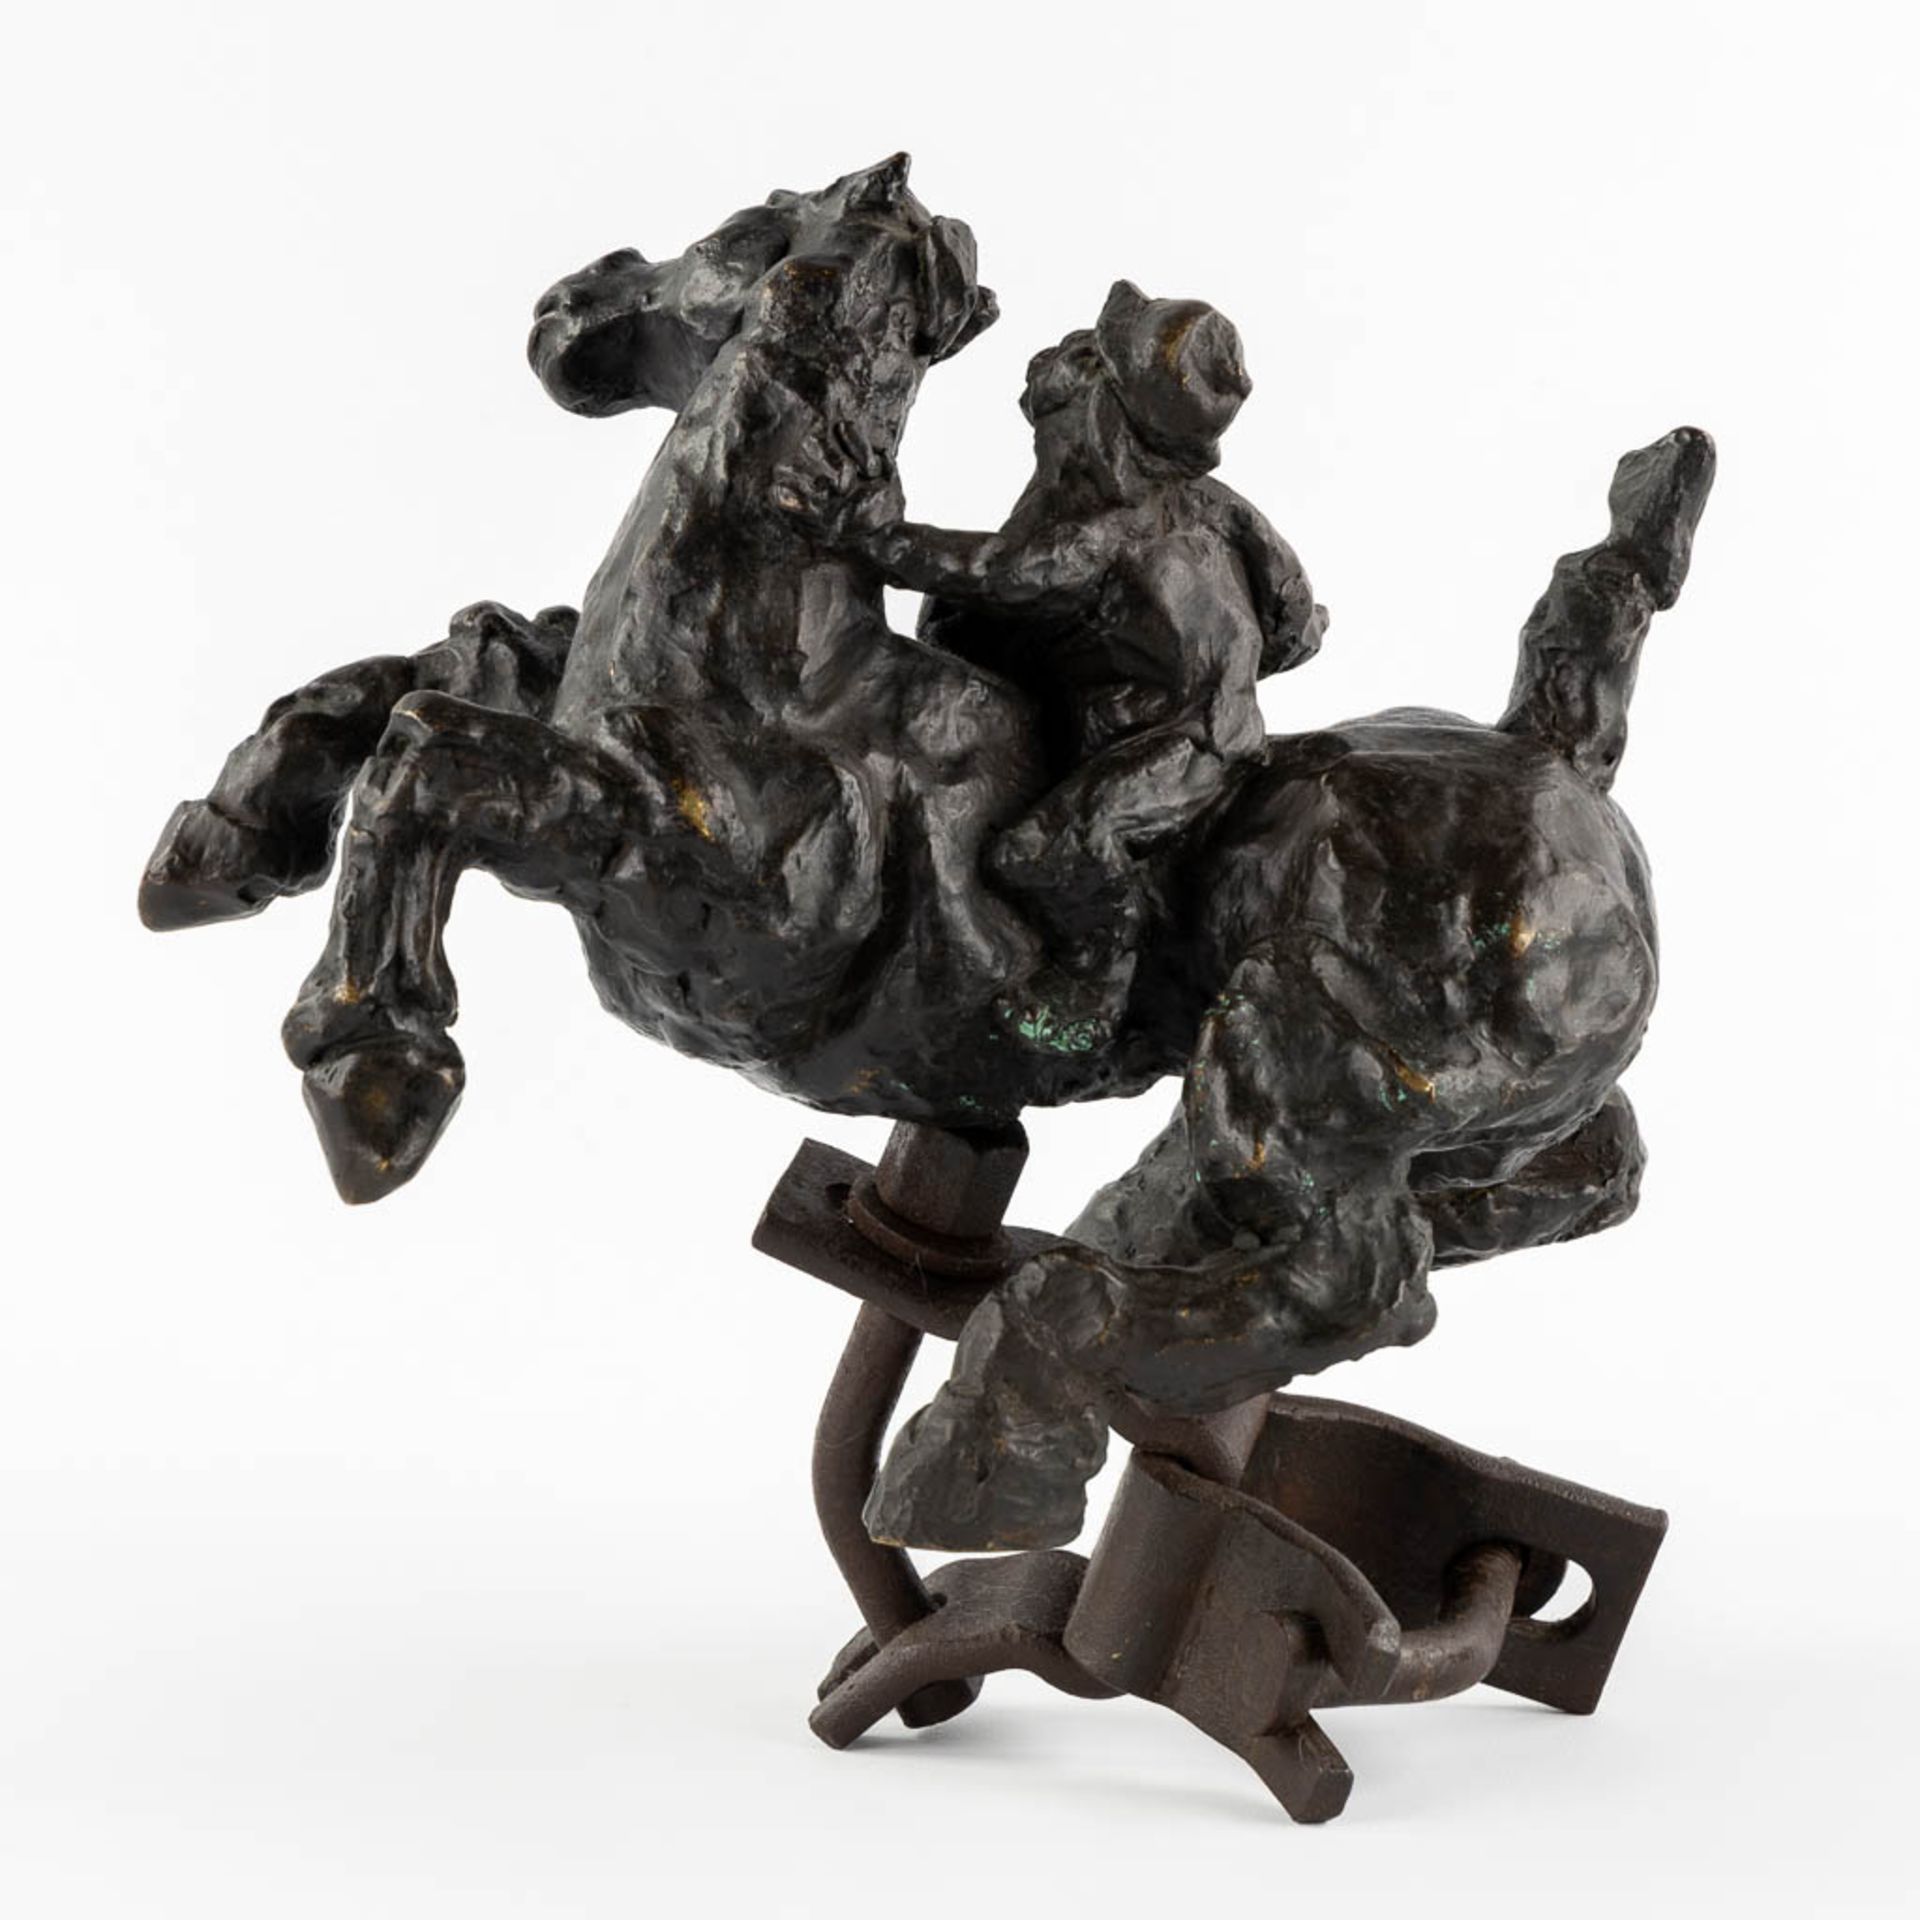 P. LAMBERT (XX) 'Riding a horse' patinated bronze, Ducros Foundry Mark. (L:15 x W:27 x H:28 cm) - Image 5 of 11